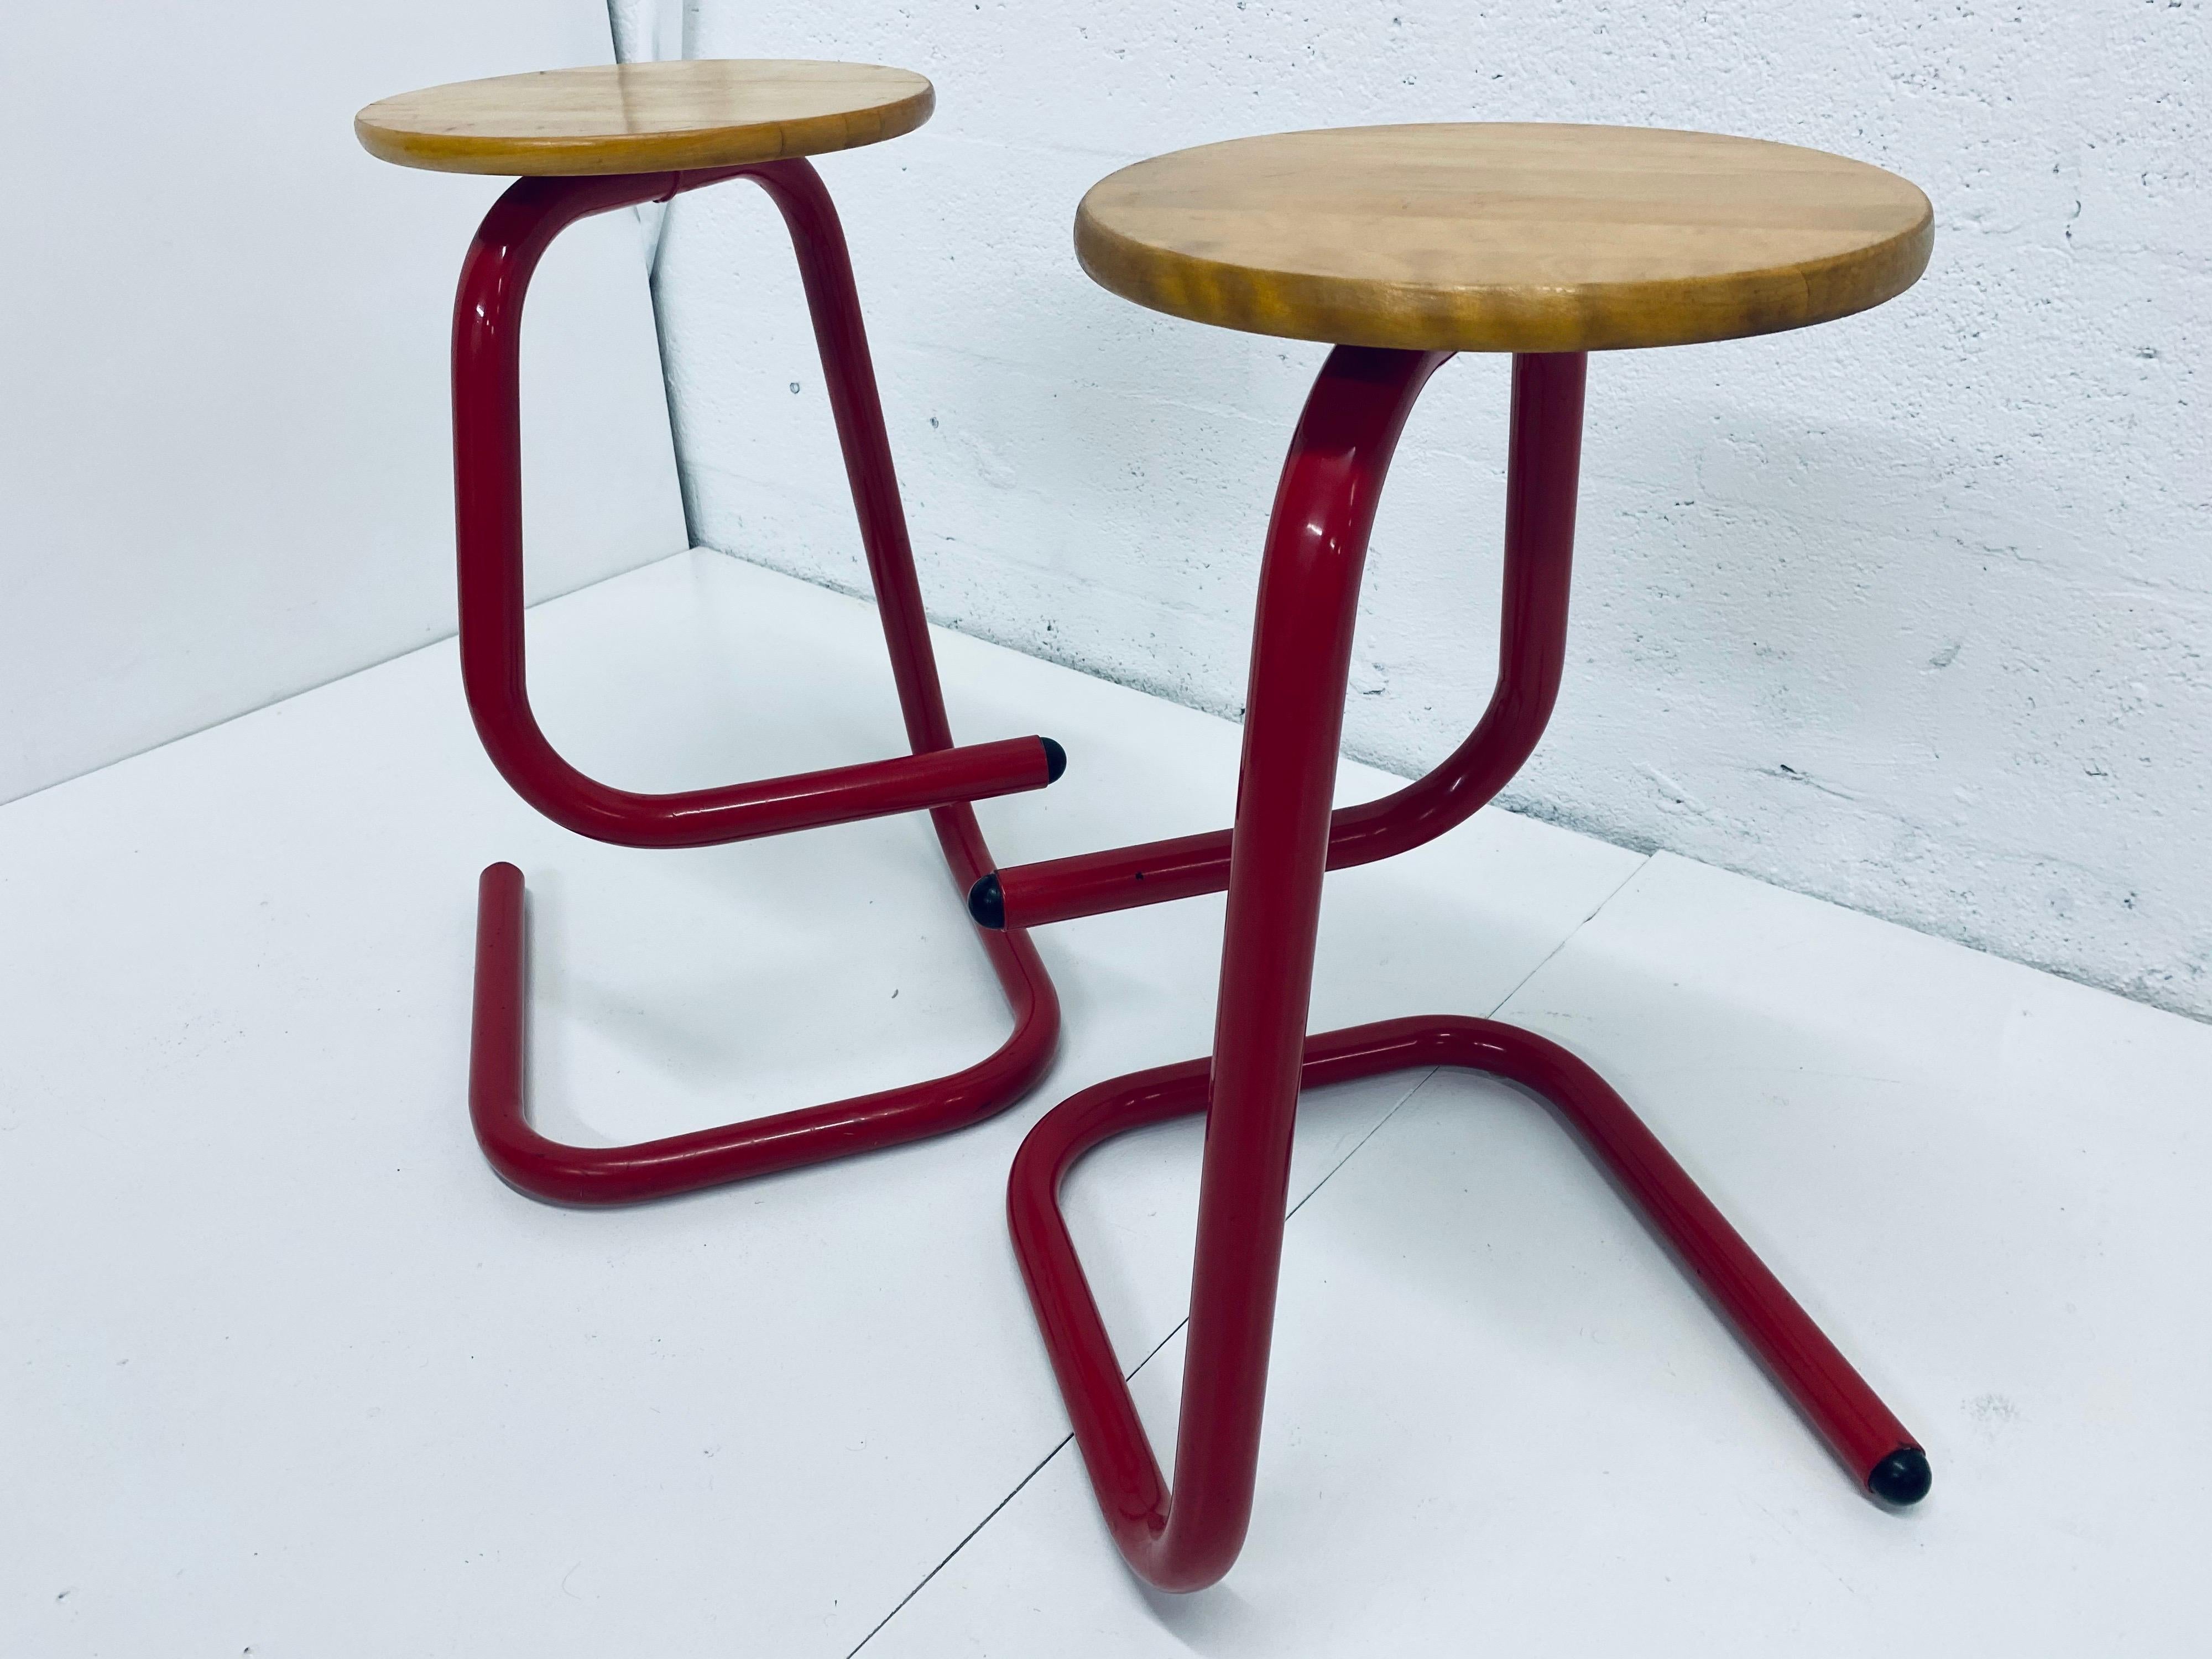 Red lacquered tubular steel frame with natural wood seat paperclip stools by Les Industries Amisco.